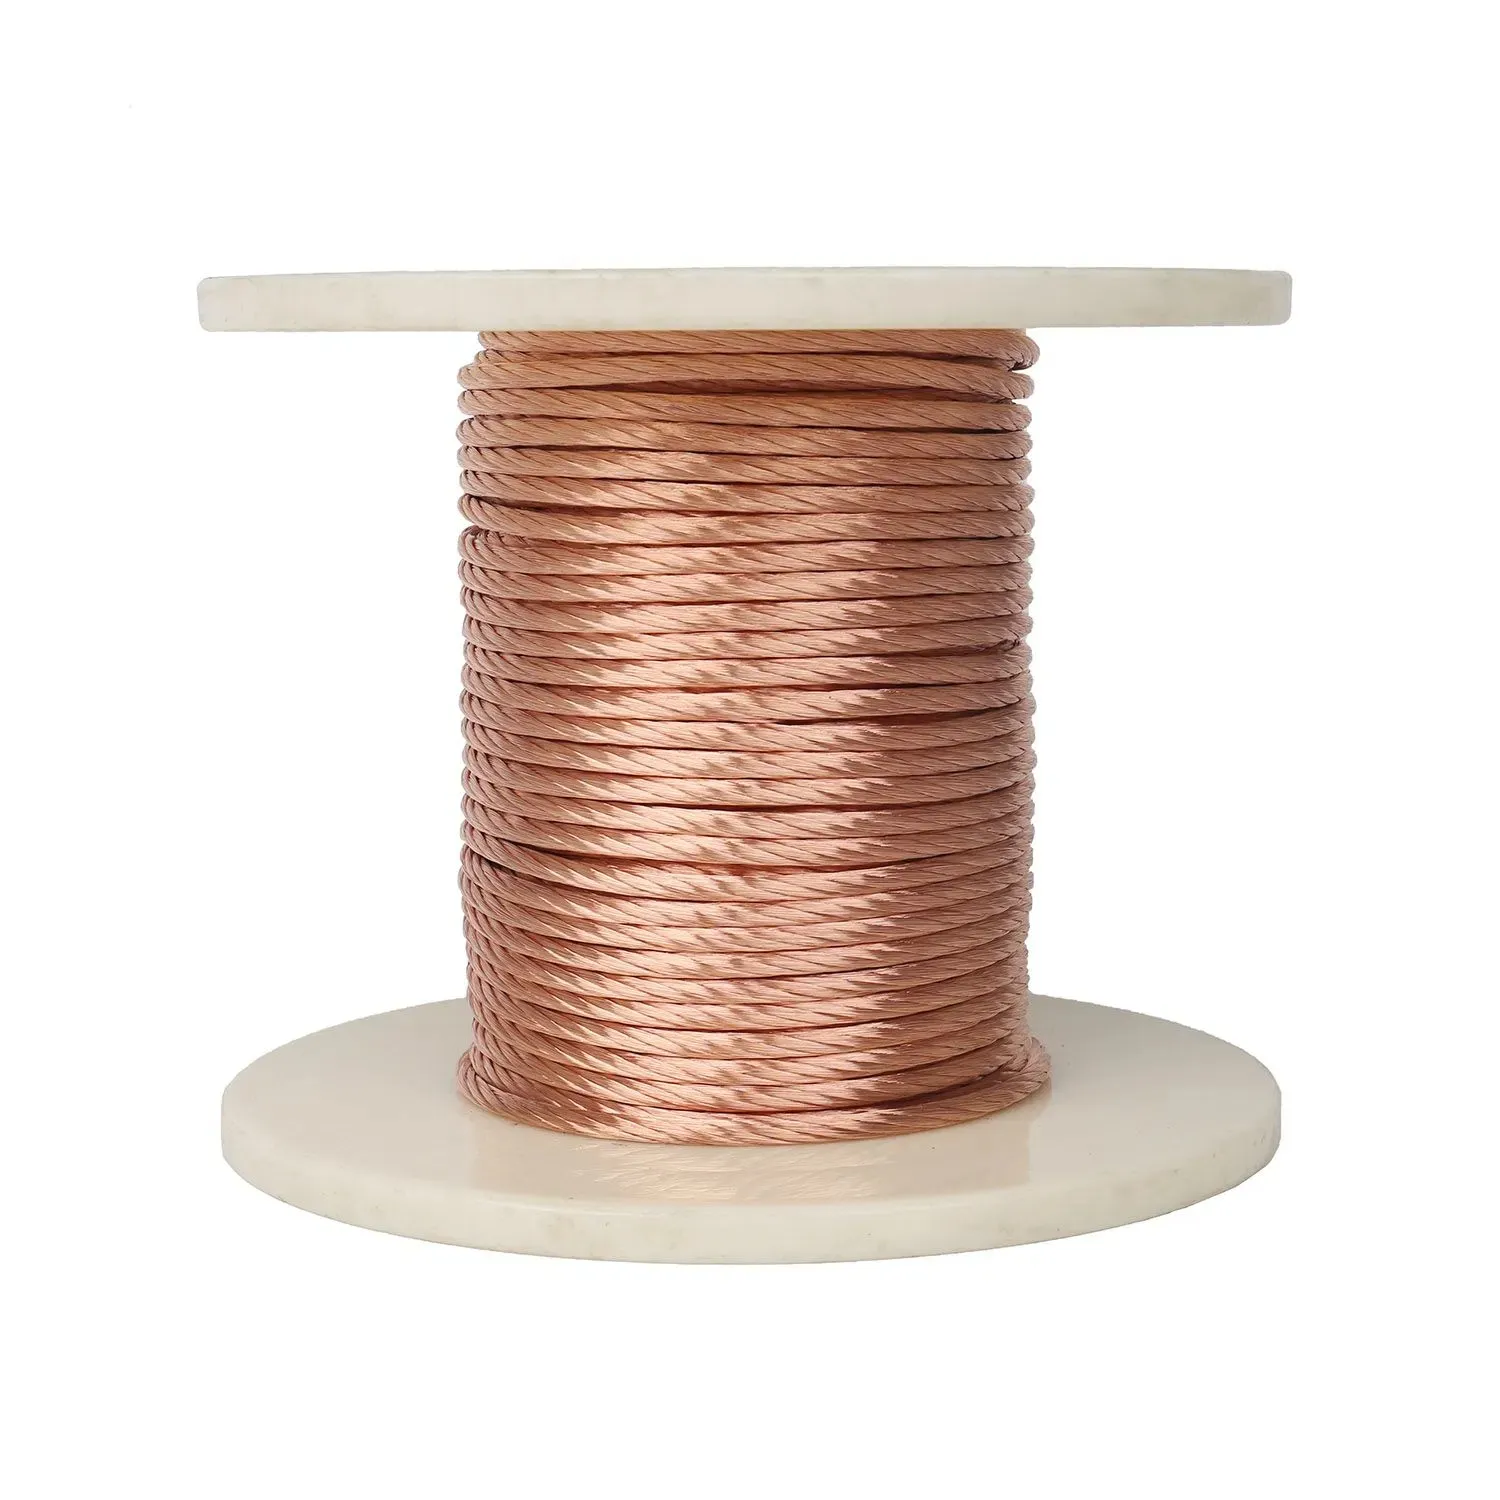 0.25mm 7cores Stranded Copper Clad Steel wire using as grounding wire / make cables